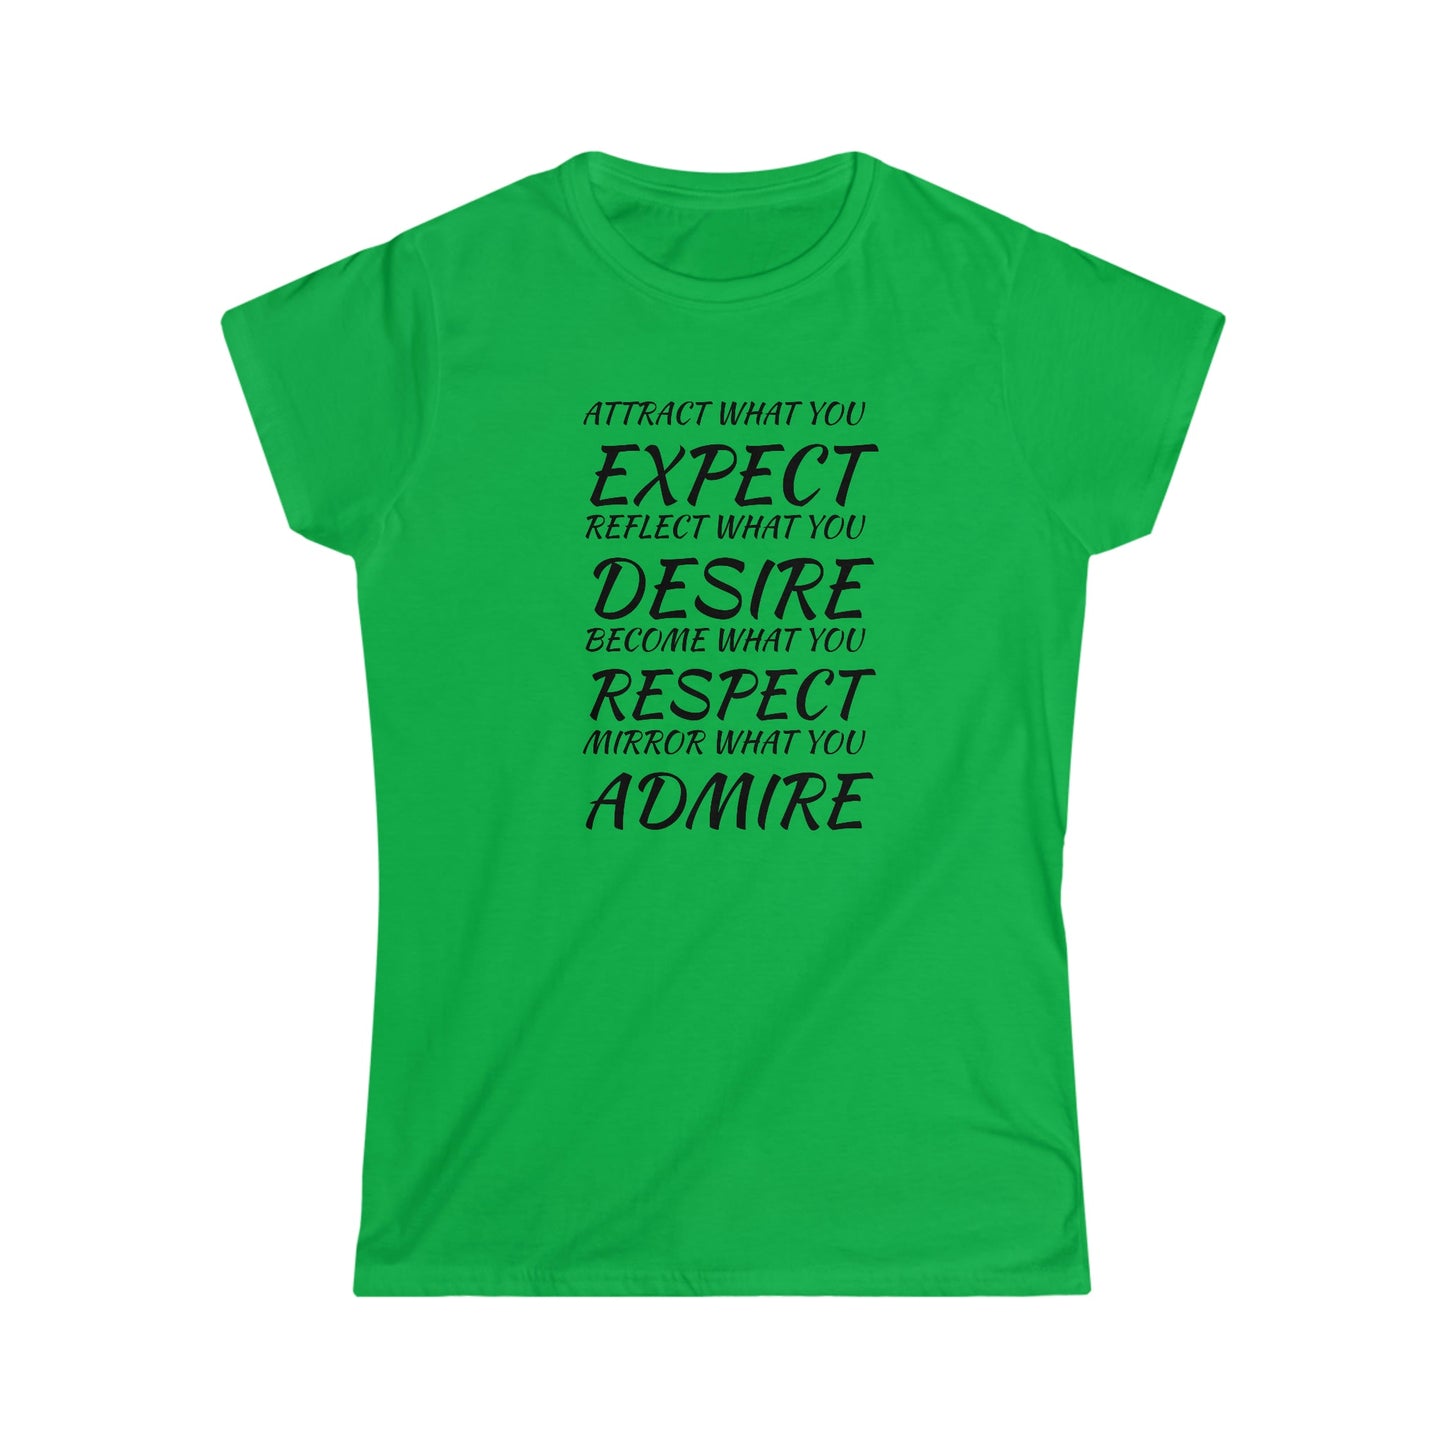 CrazyYetiClothing, CYC, Expect, Desire, Respect, Admire - Women's Softstyle Tee, T-Shirt